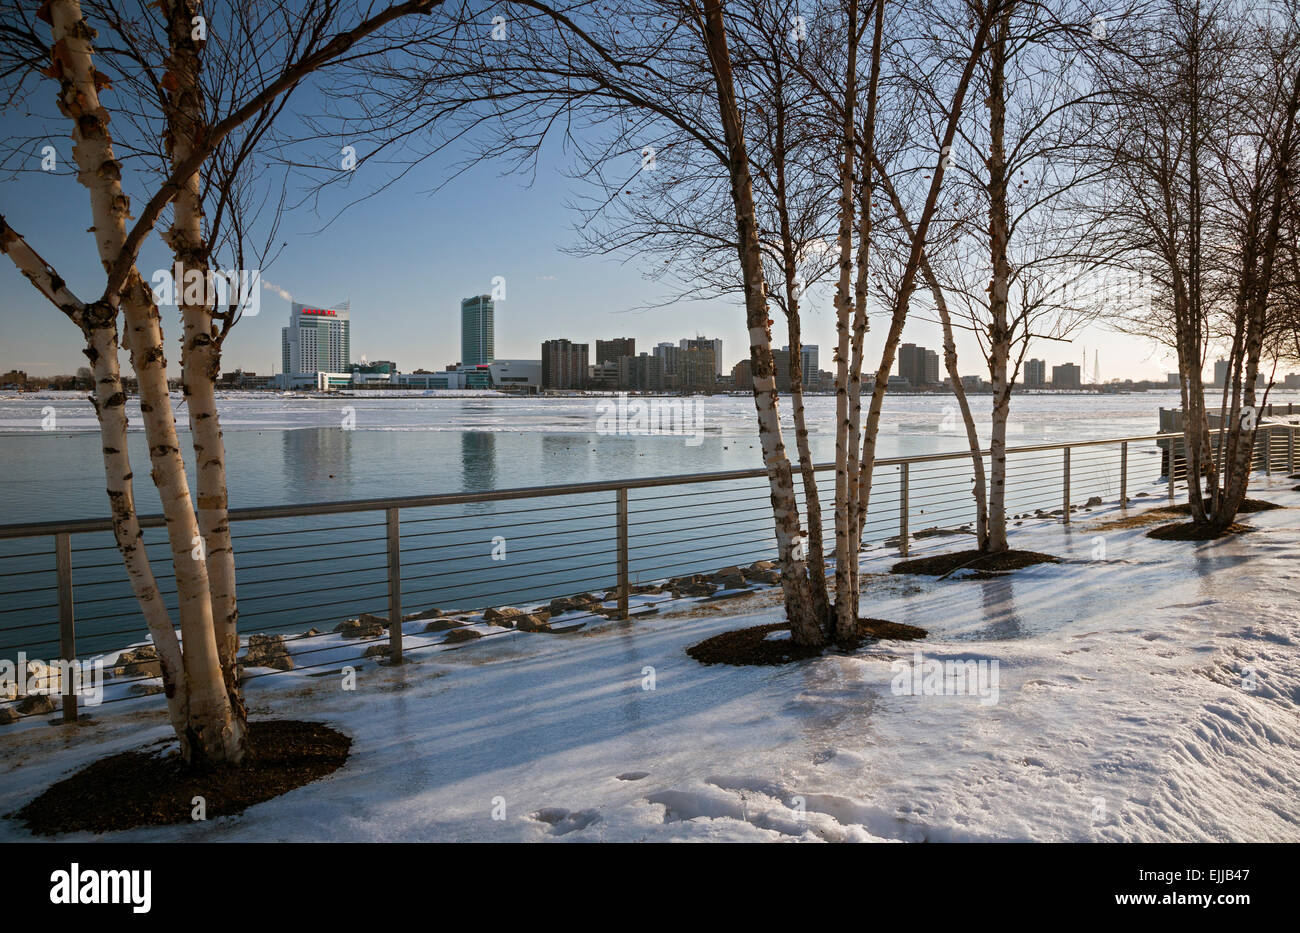 Detroit, Michigan - The Detroit River in winter, photographed from the Detroit Riverwalk. Windsor, Ontario is across the river. Stock Photo